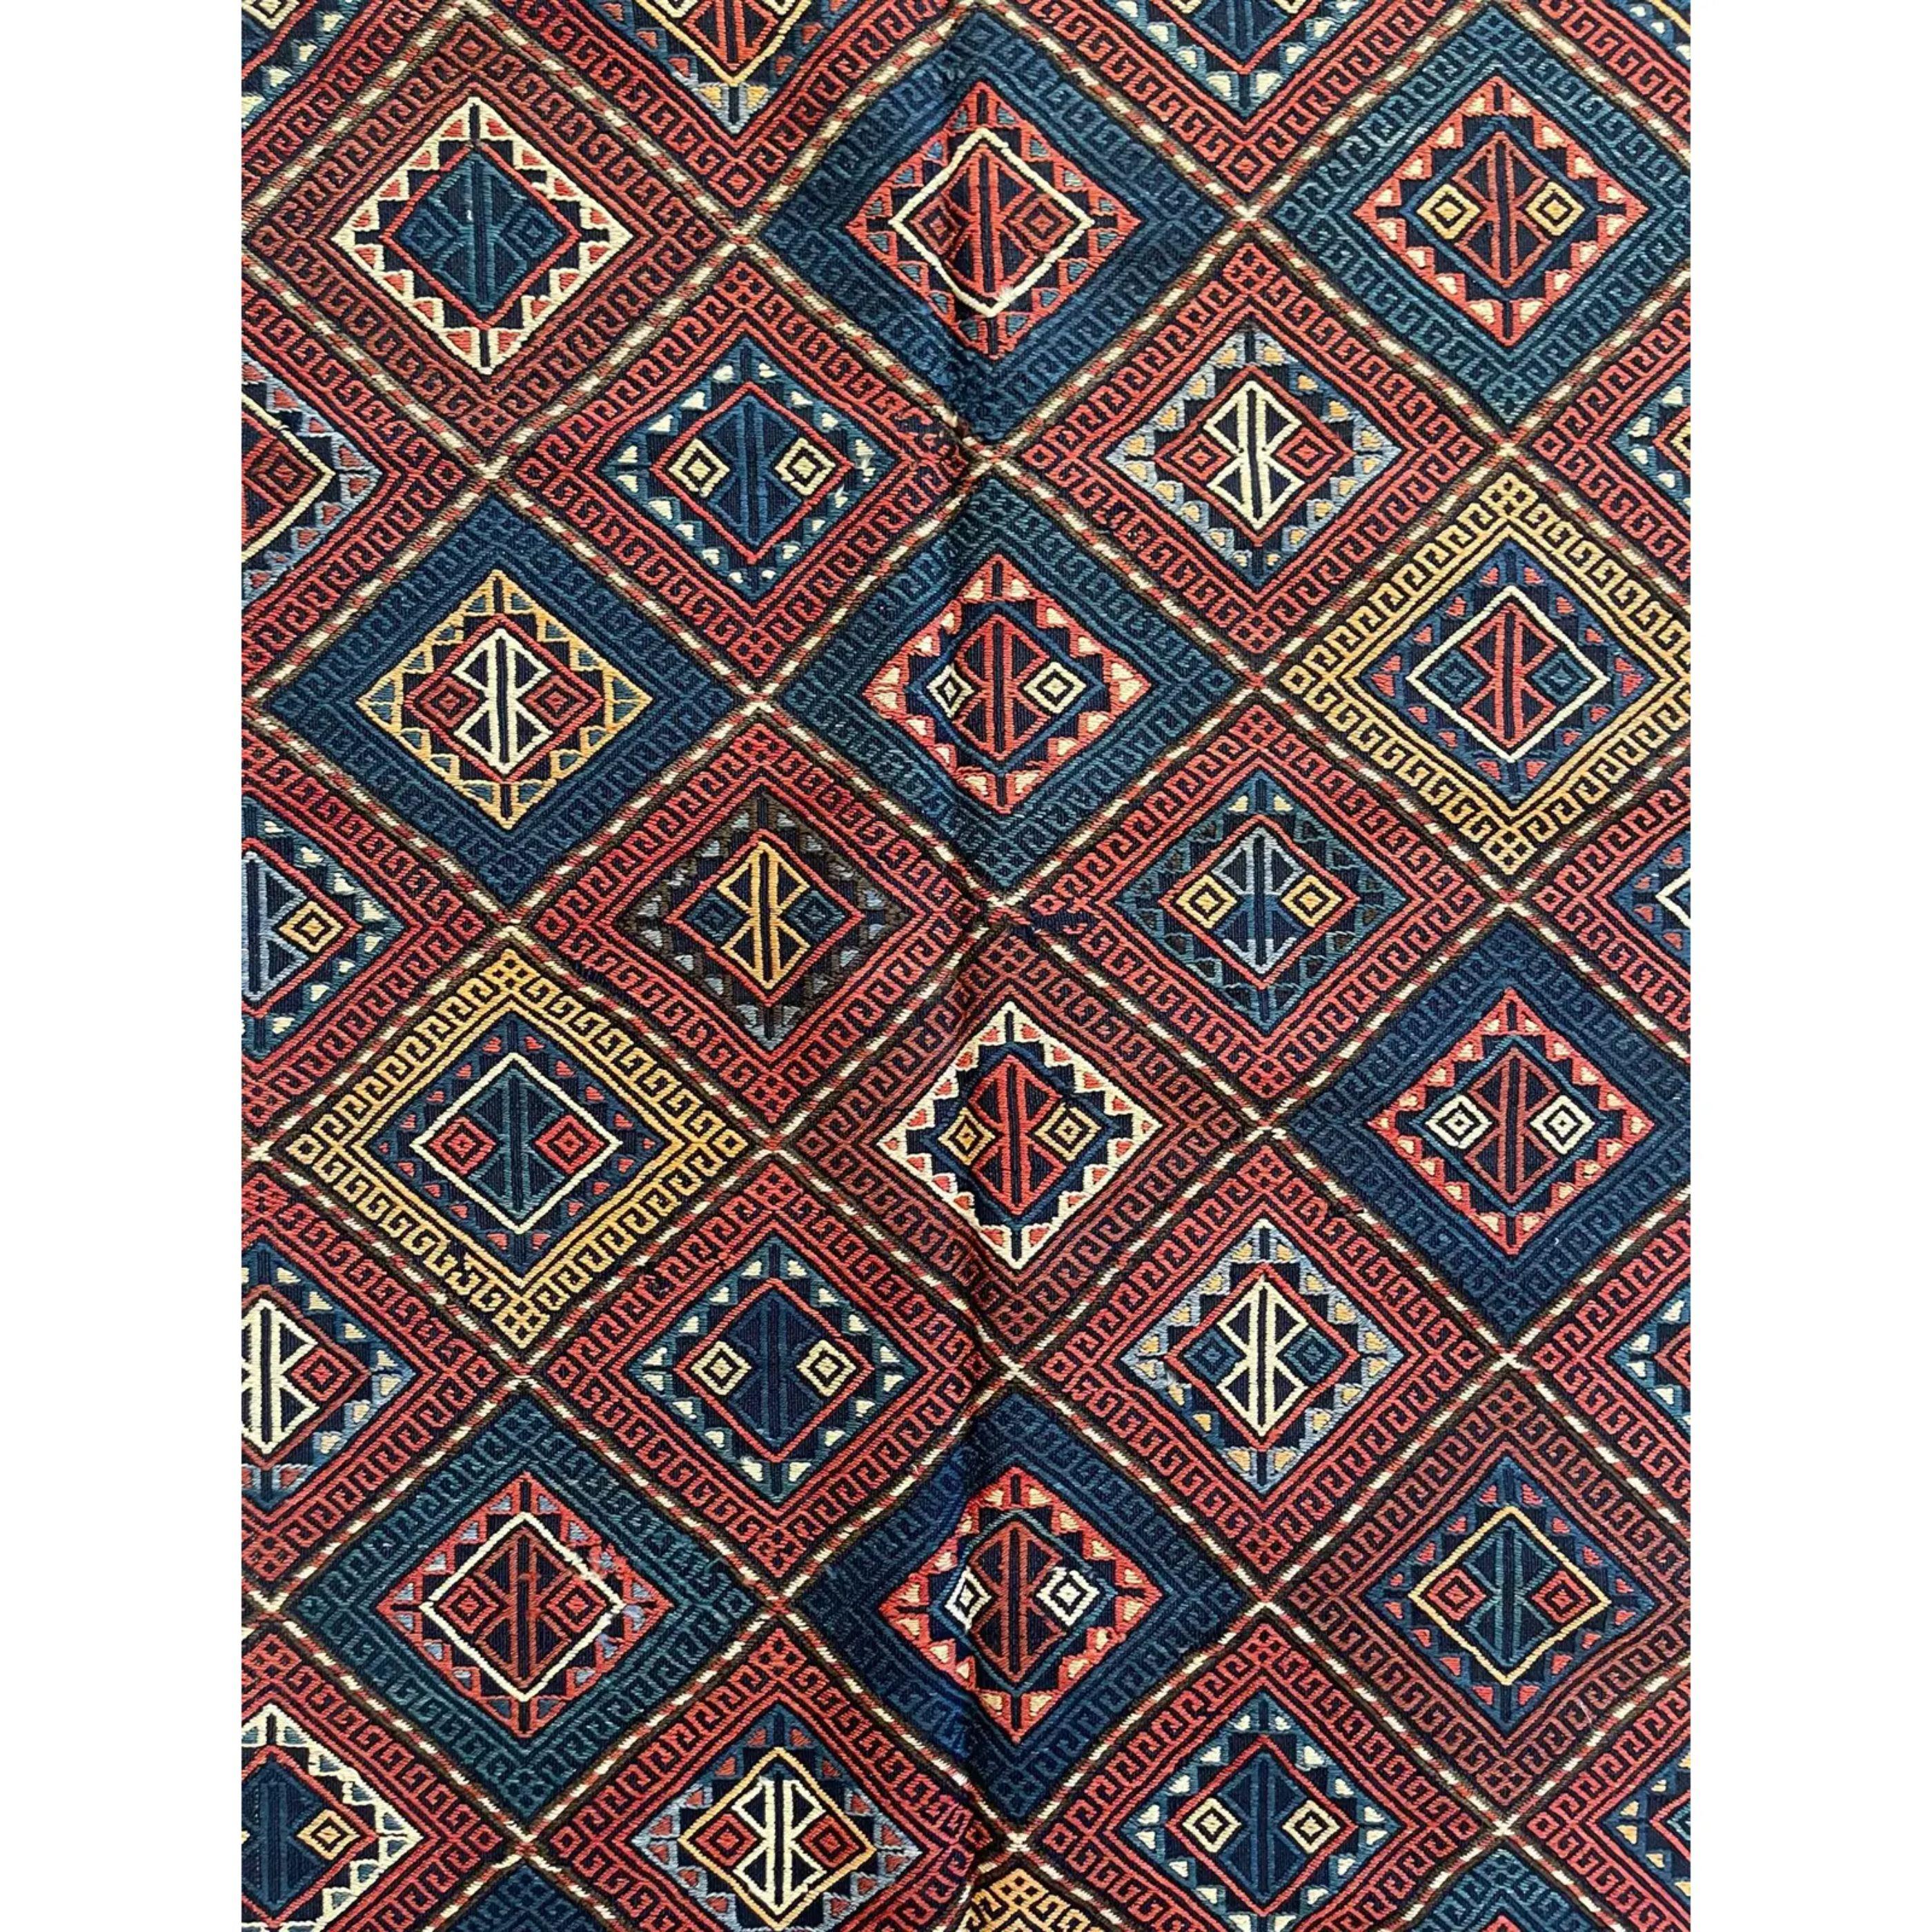 Soumak rugs (also spelled Sumak) – This construction technique produces a flat-weave rug that is thick, strong and exceptionally durable. Unlike kilims, Soumak rugs are not reversible because non-clipped yarns are left on the back. However, they are